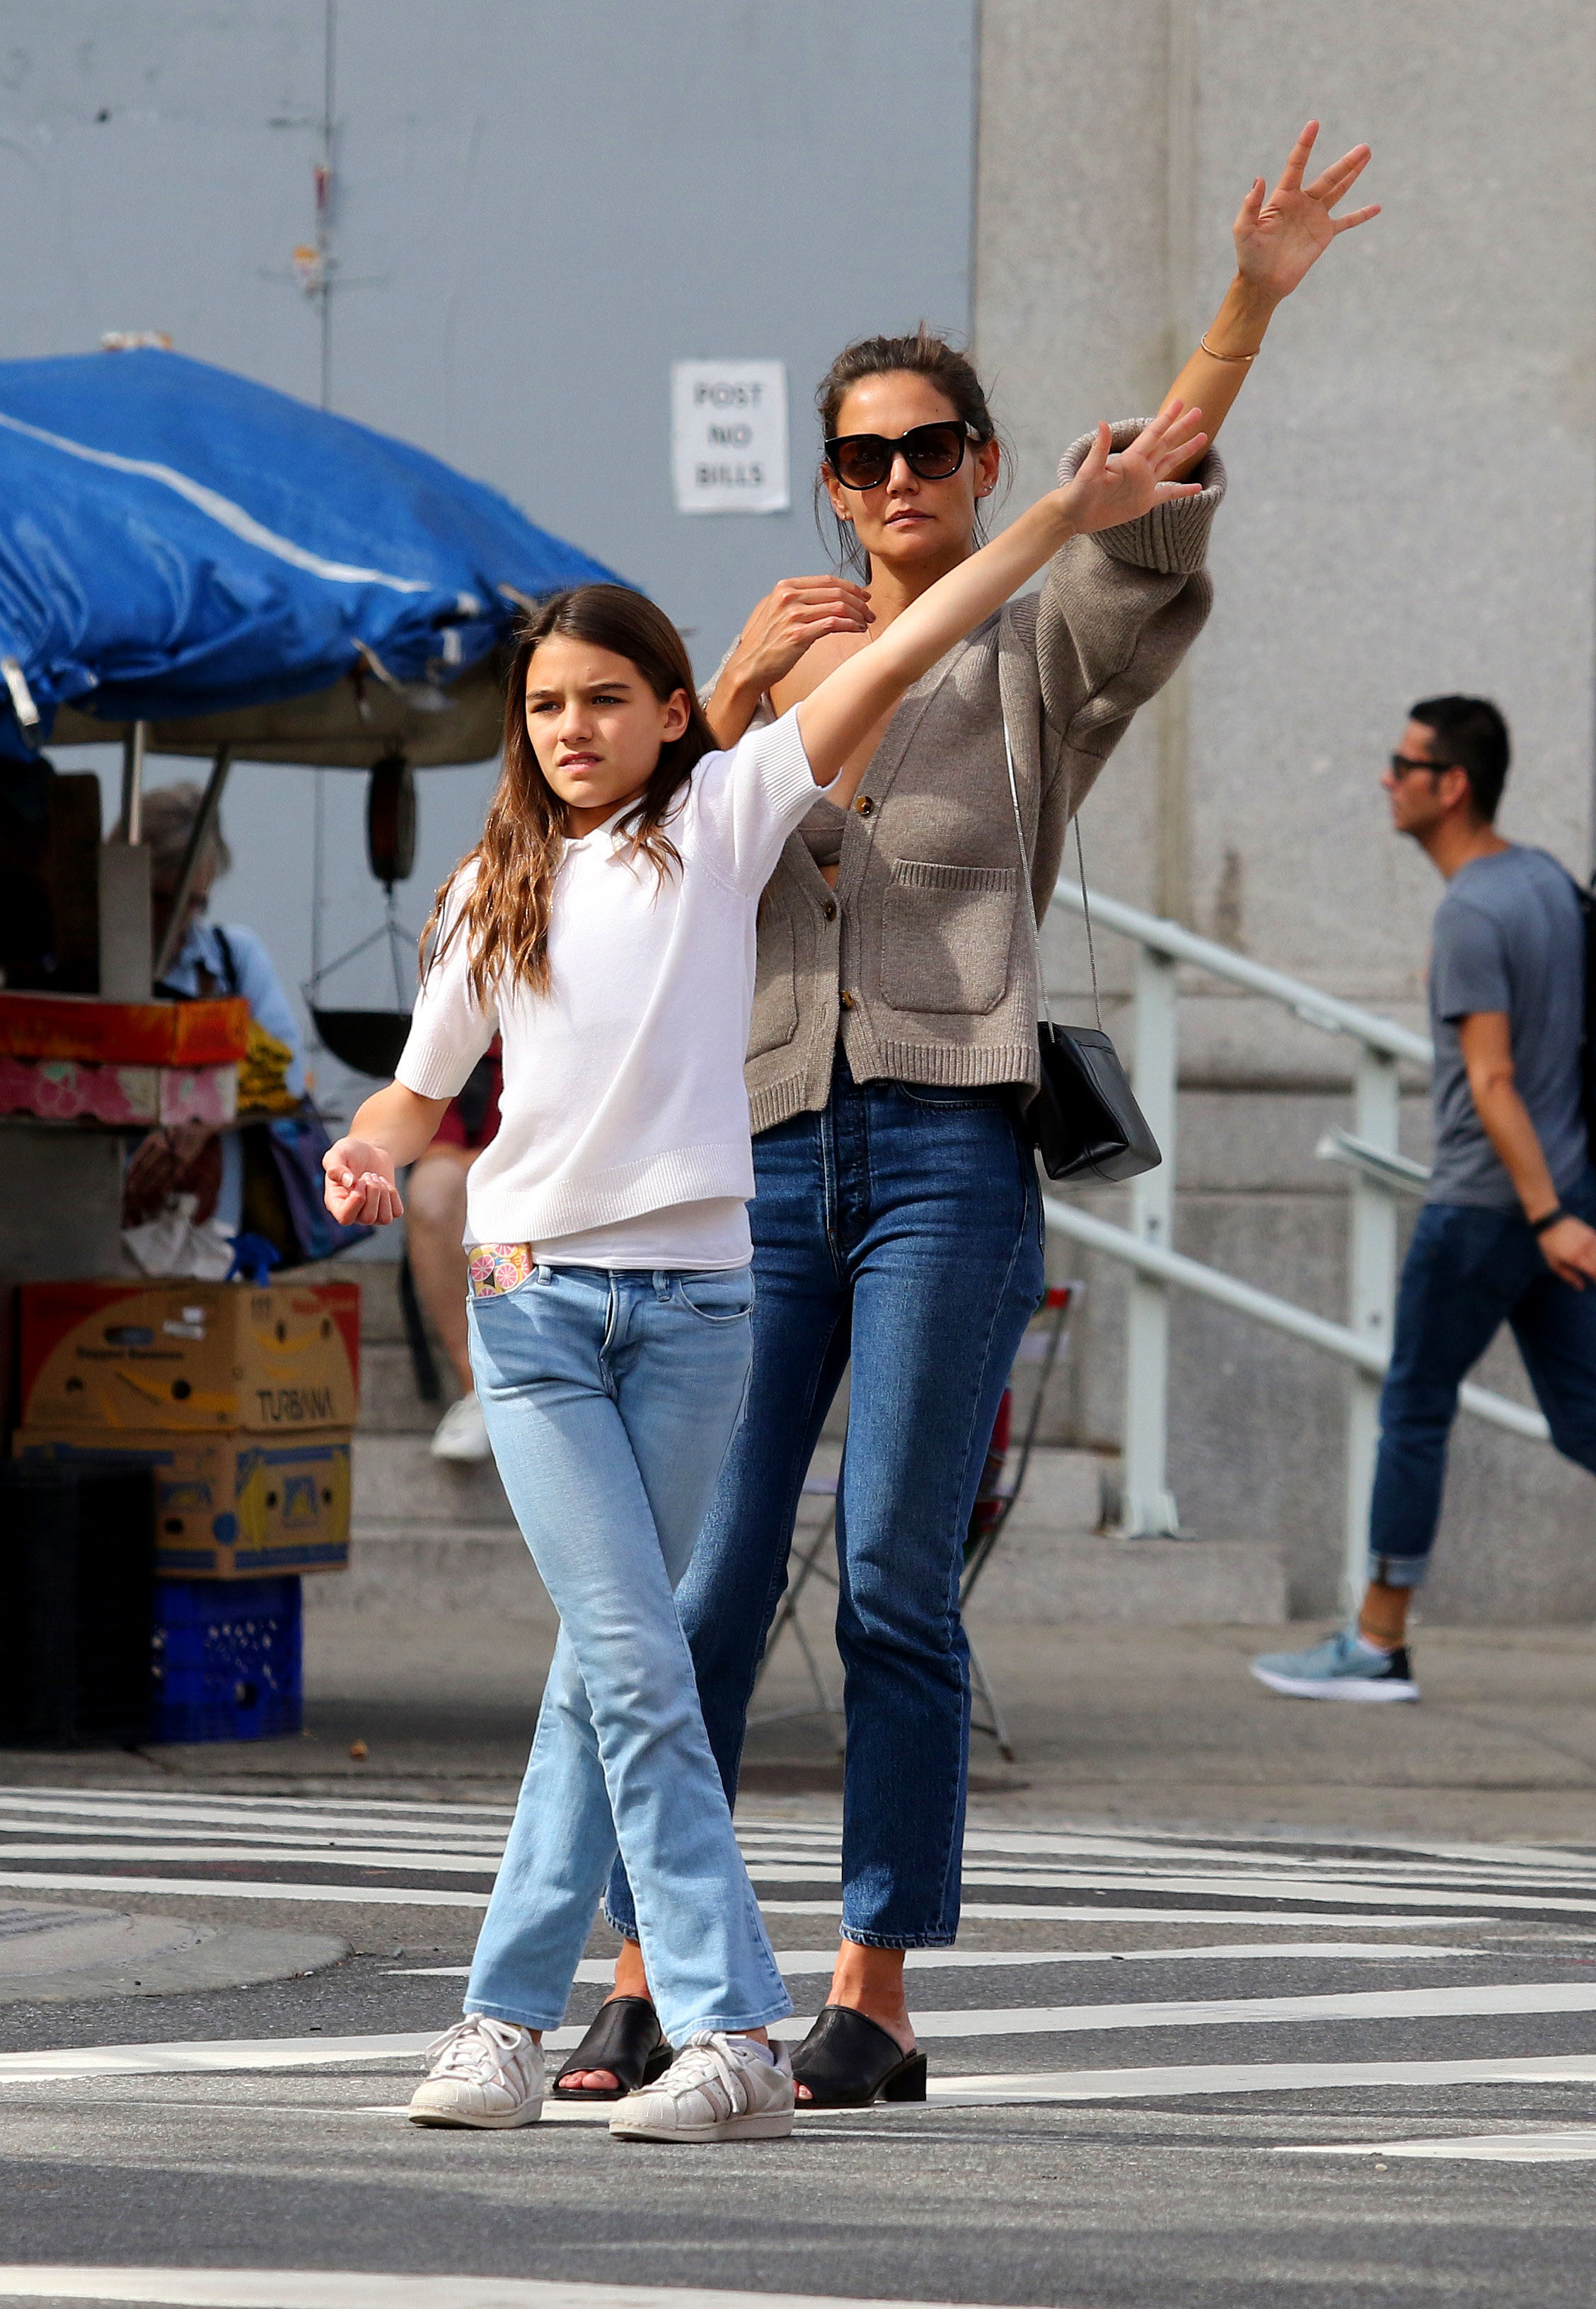 Katie Holmes Suri Cruise Hailing A Cab In NYC ?fit=800%2C1157&quality=86&strip=all